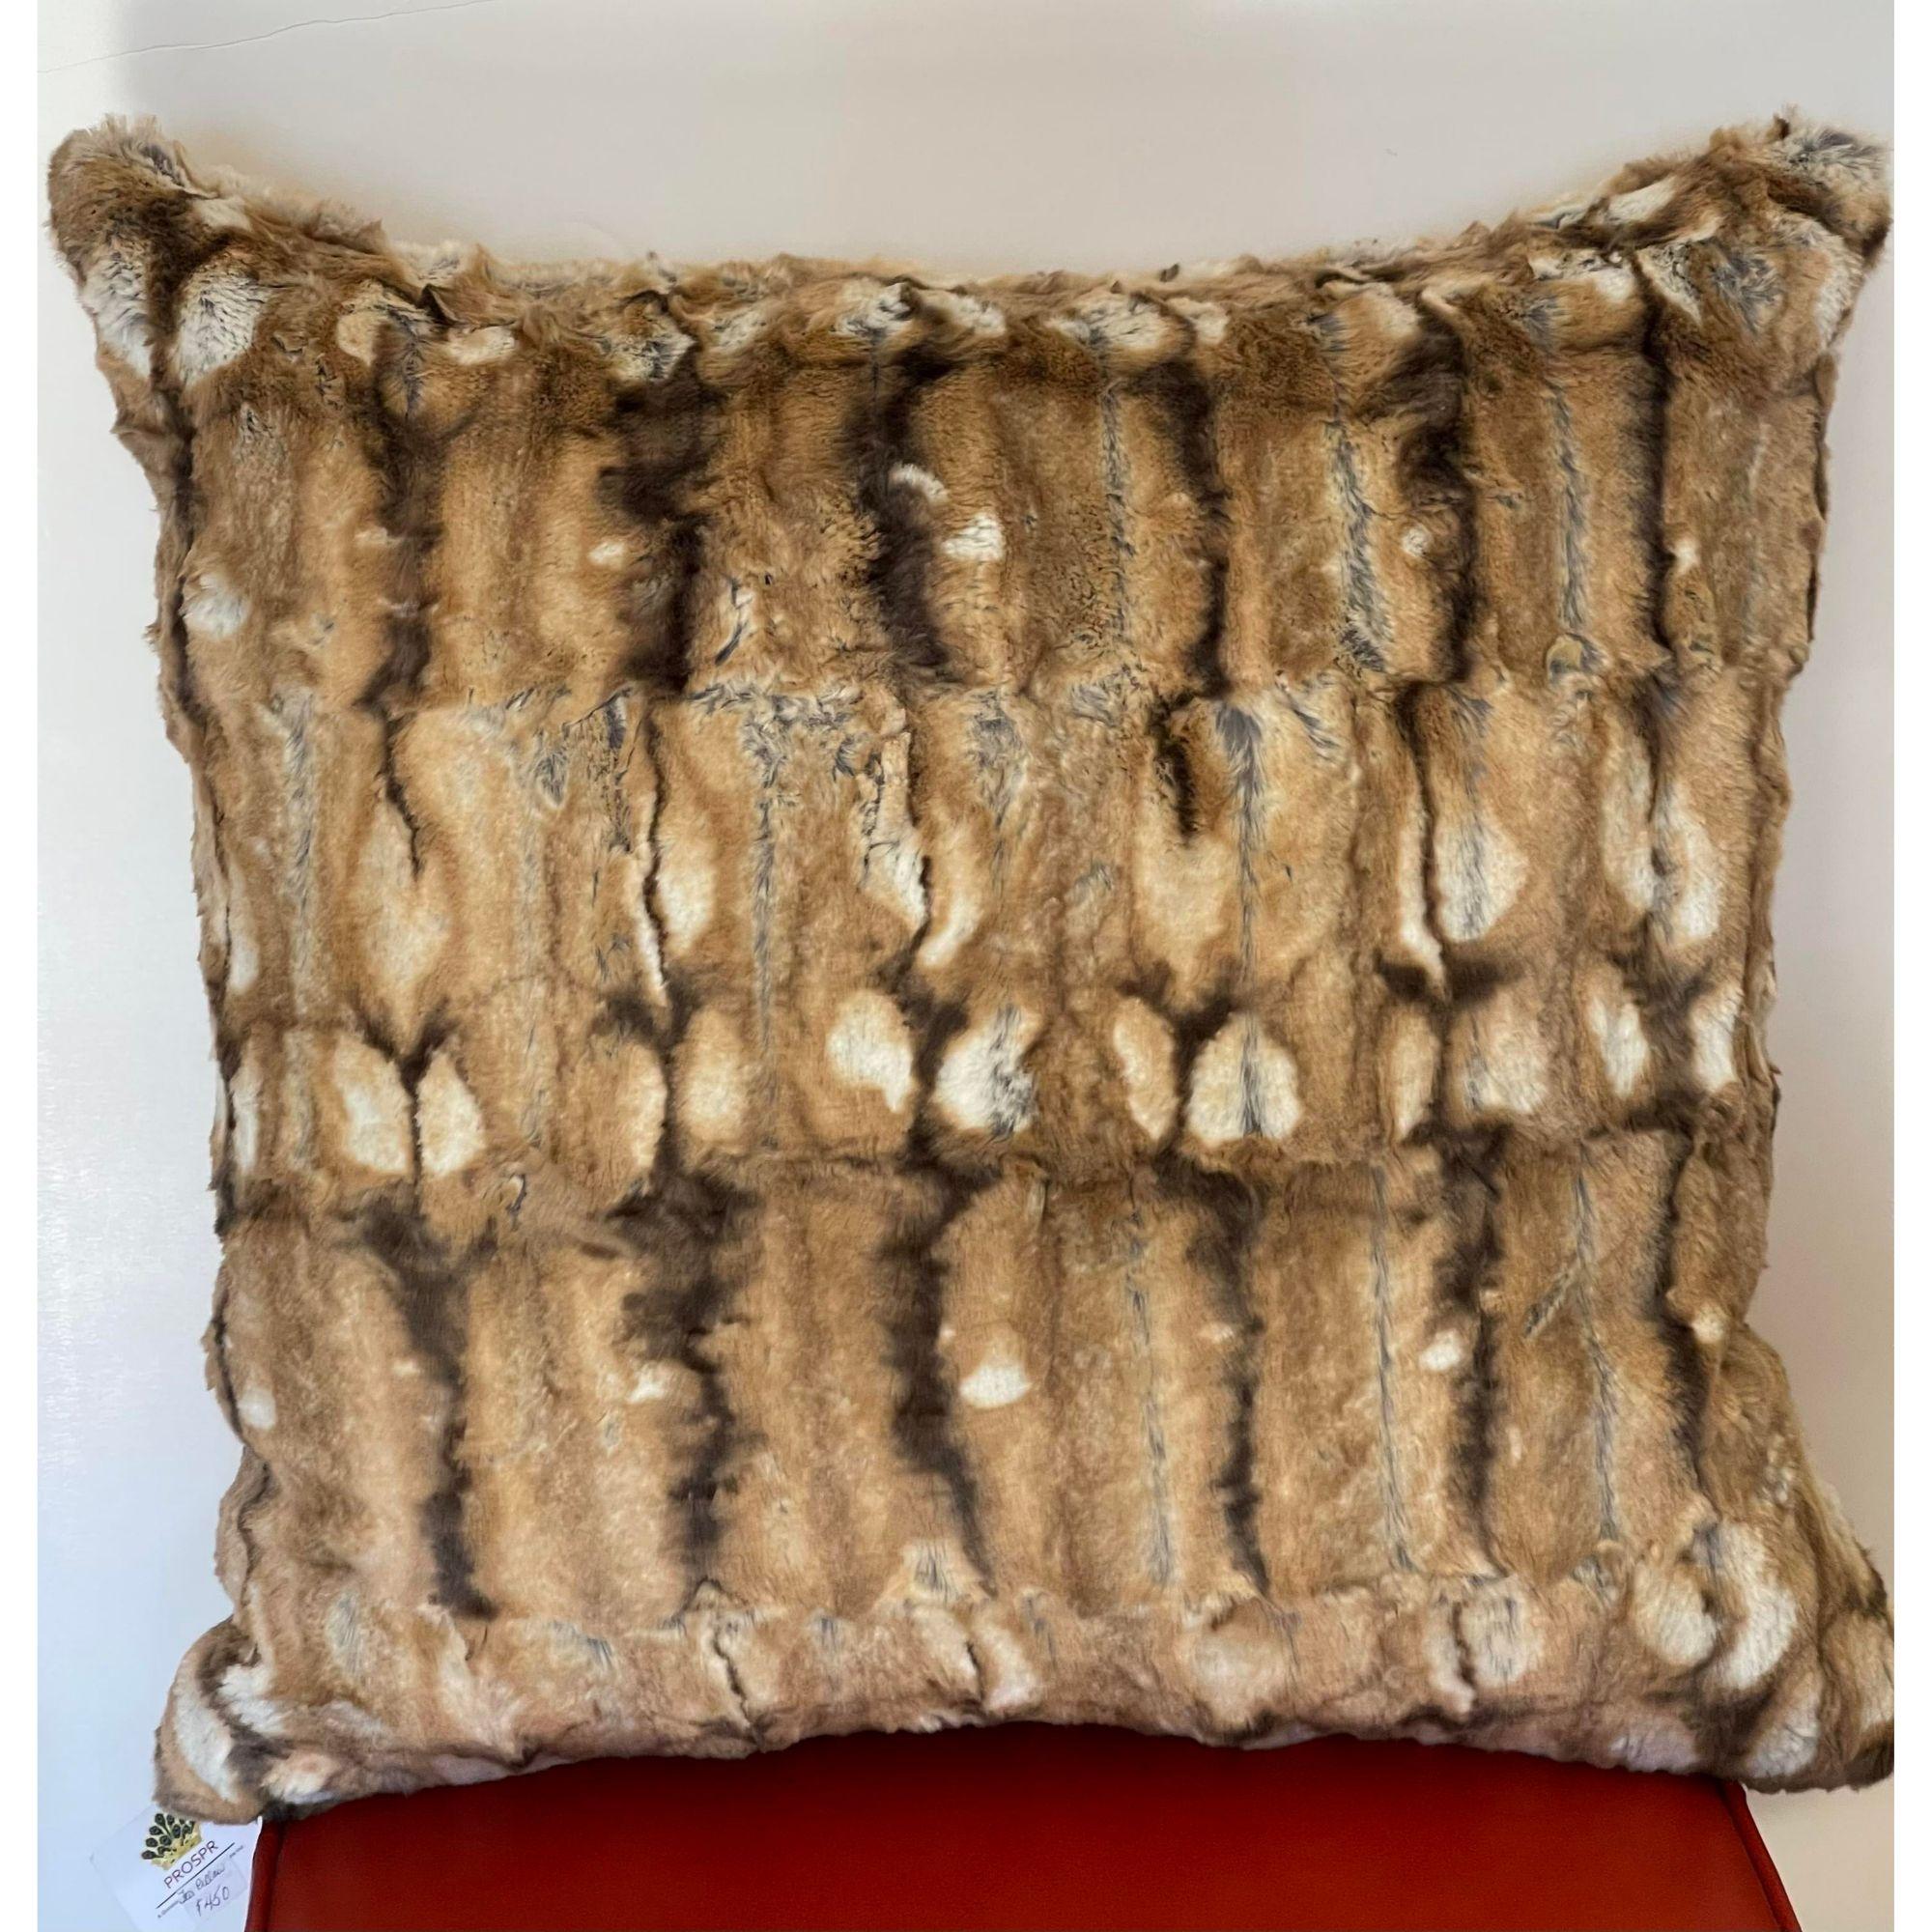 Kneedler Fauchere faux fur chinchilla down filled pillow.
Priced each.

Additional information:
Materials: feather, silk.
Color: beige.
Brand: Randy Esada Designs for Prospr.
Designer: Randy Esada Designs for Prospr.
Period: 2010s.
Styles: